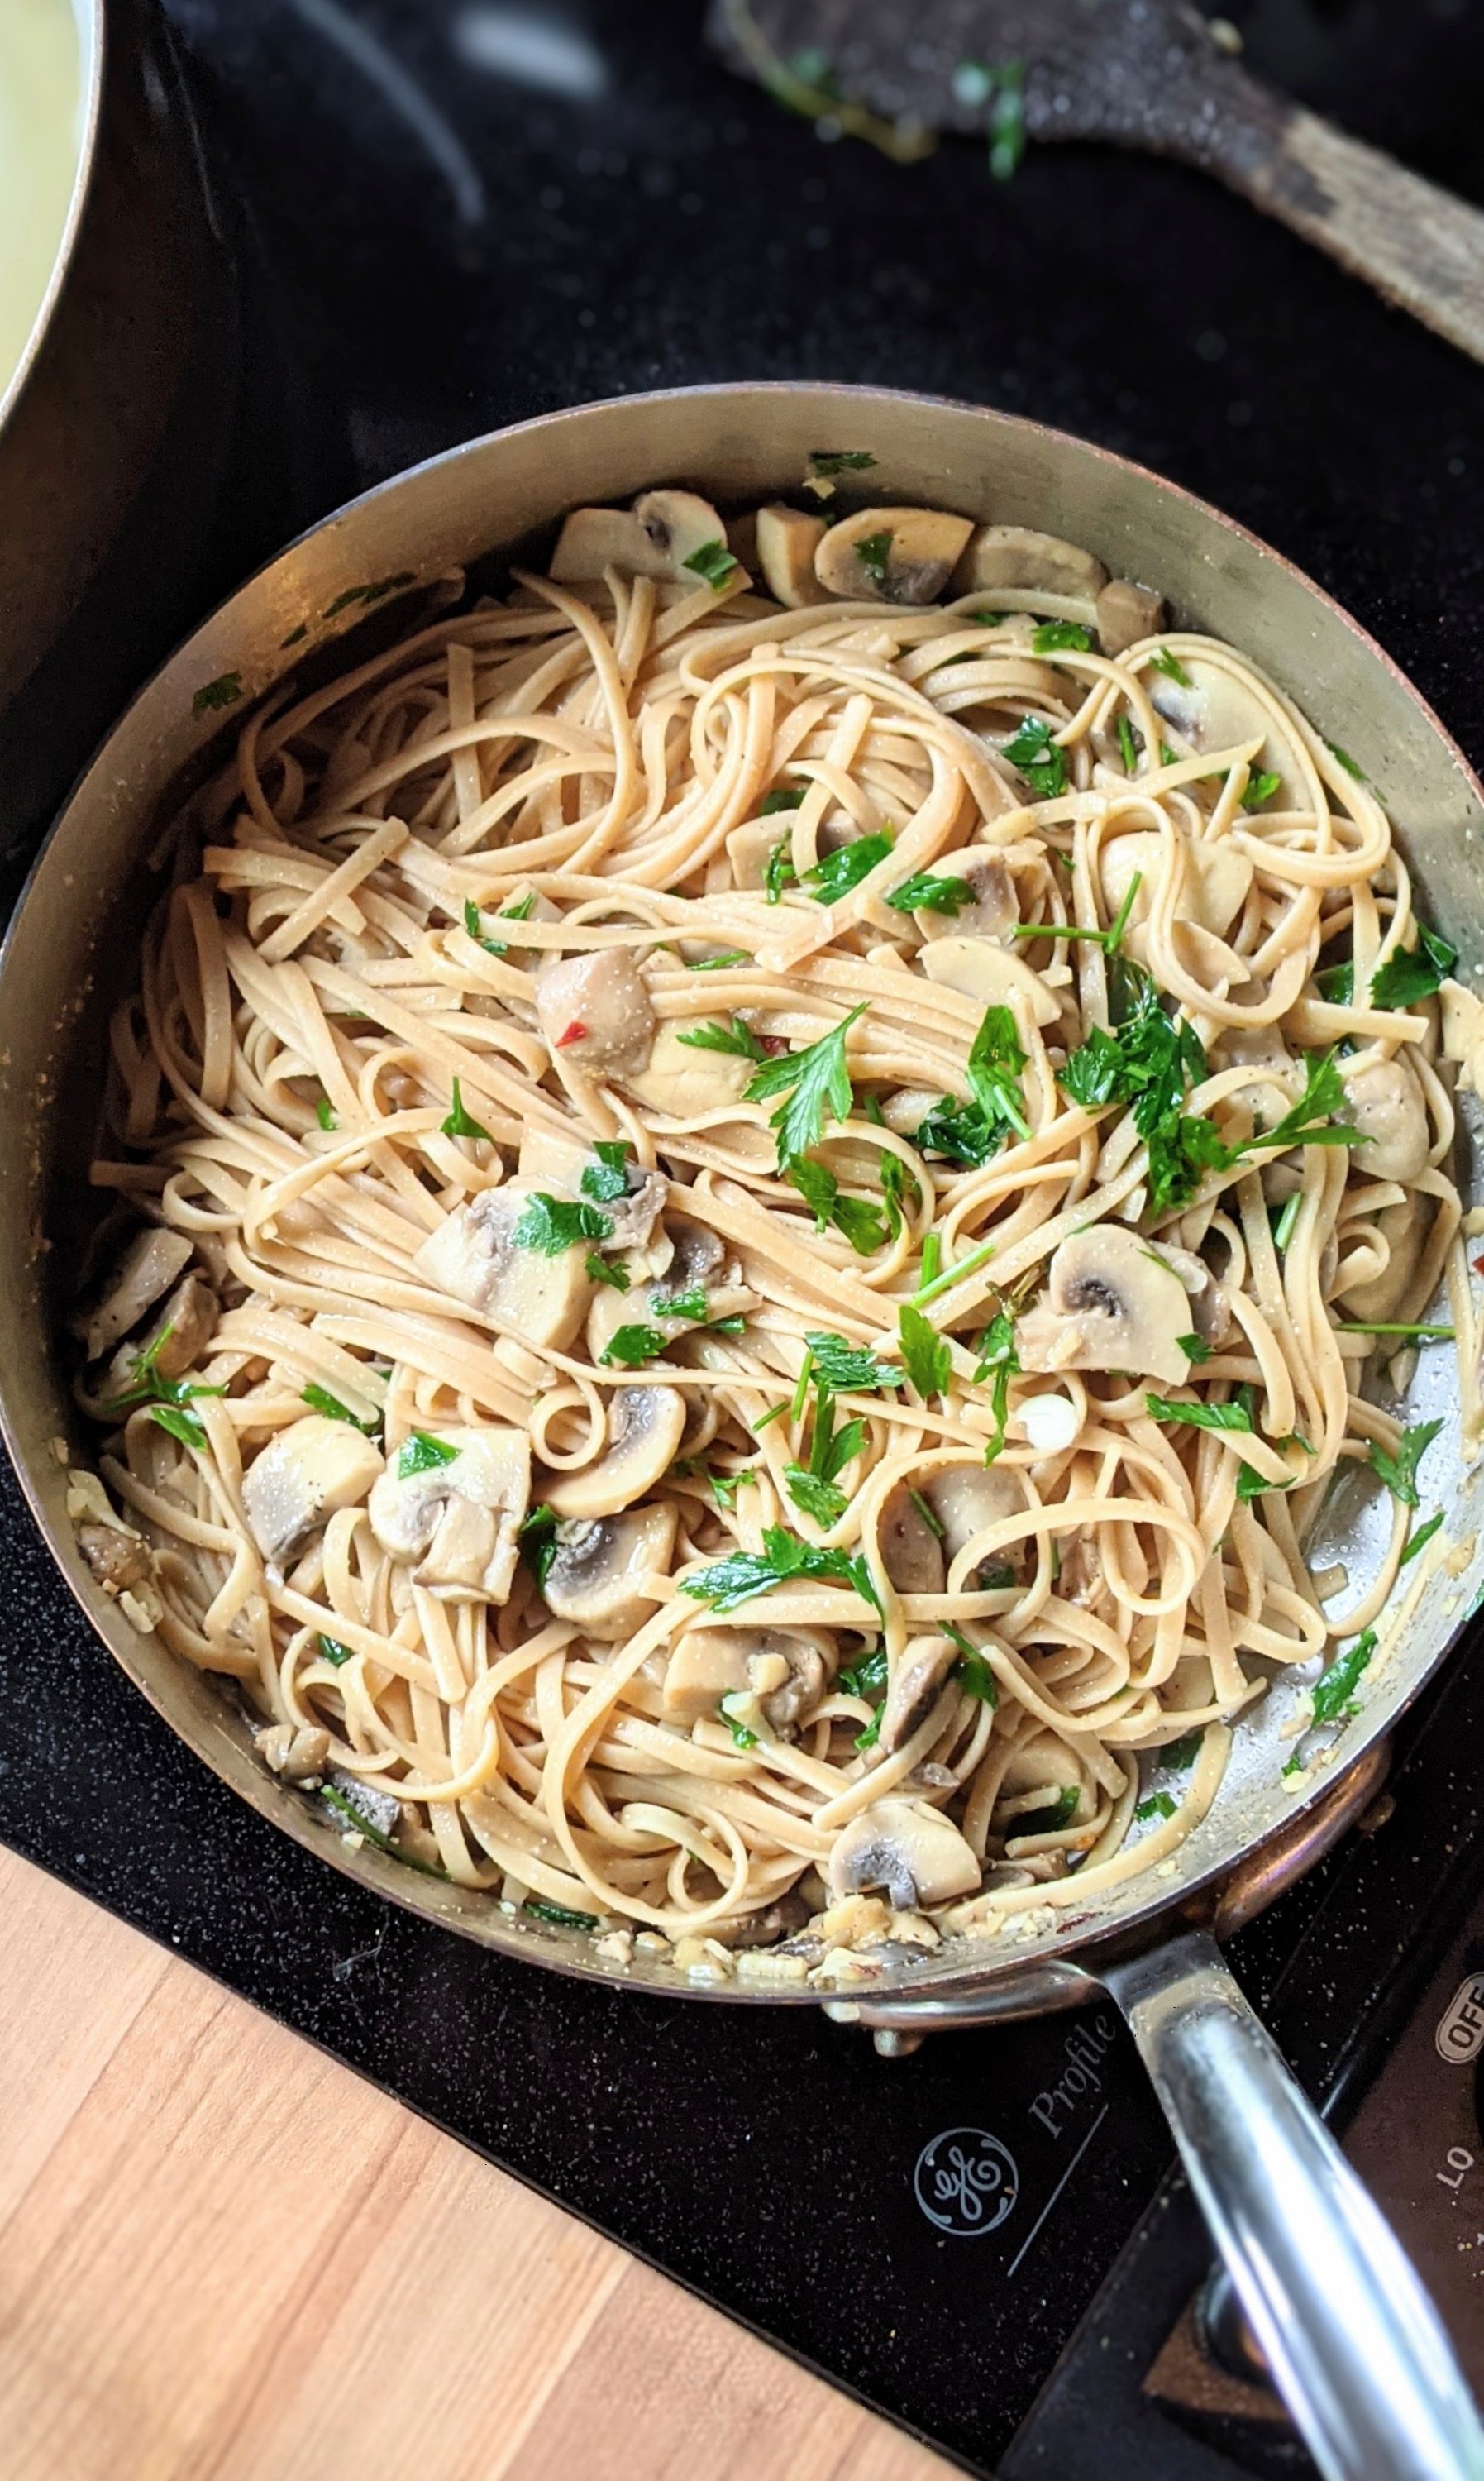 gluten free mushroom white wine pasta sauce recipe vegetarian light pasta recipes in 30 minutes or less easy 20 minute pasta night recipes for date night last minute recipes fancy pasta that's easy and simple